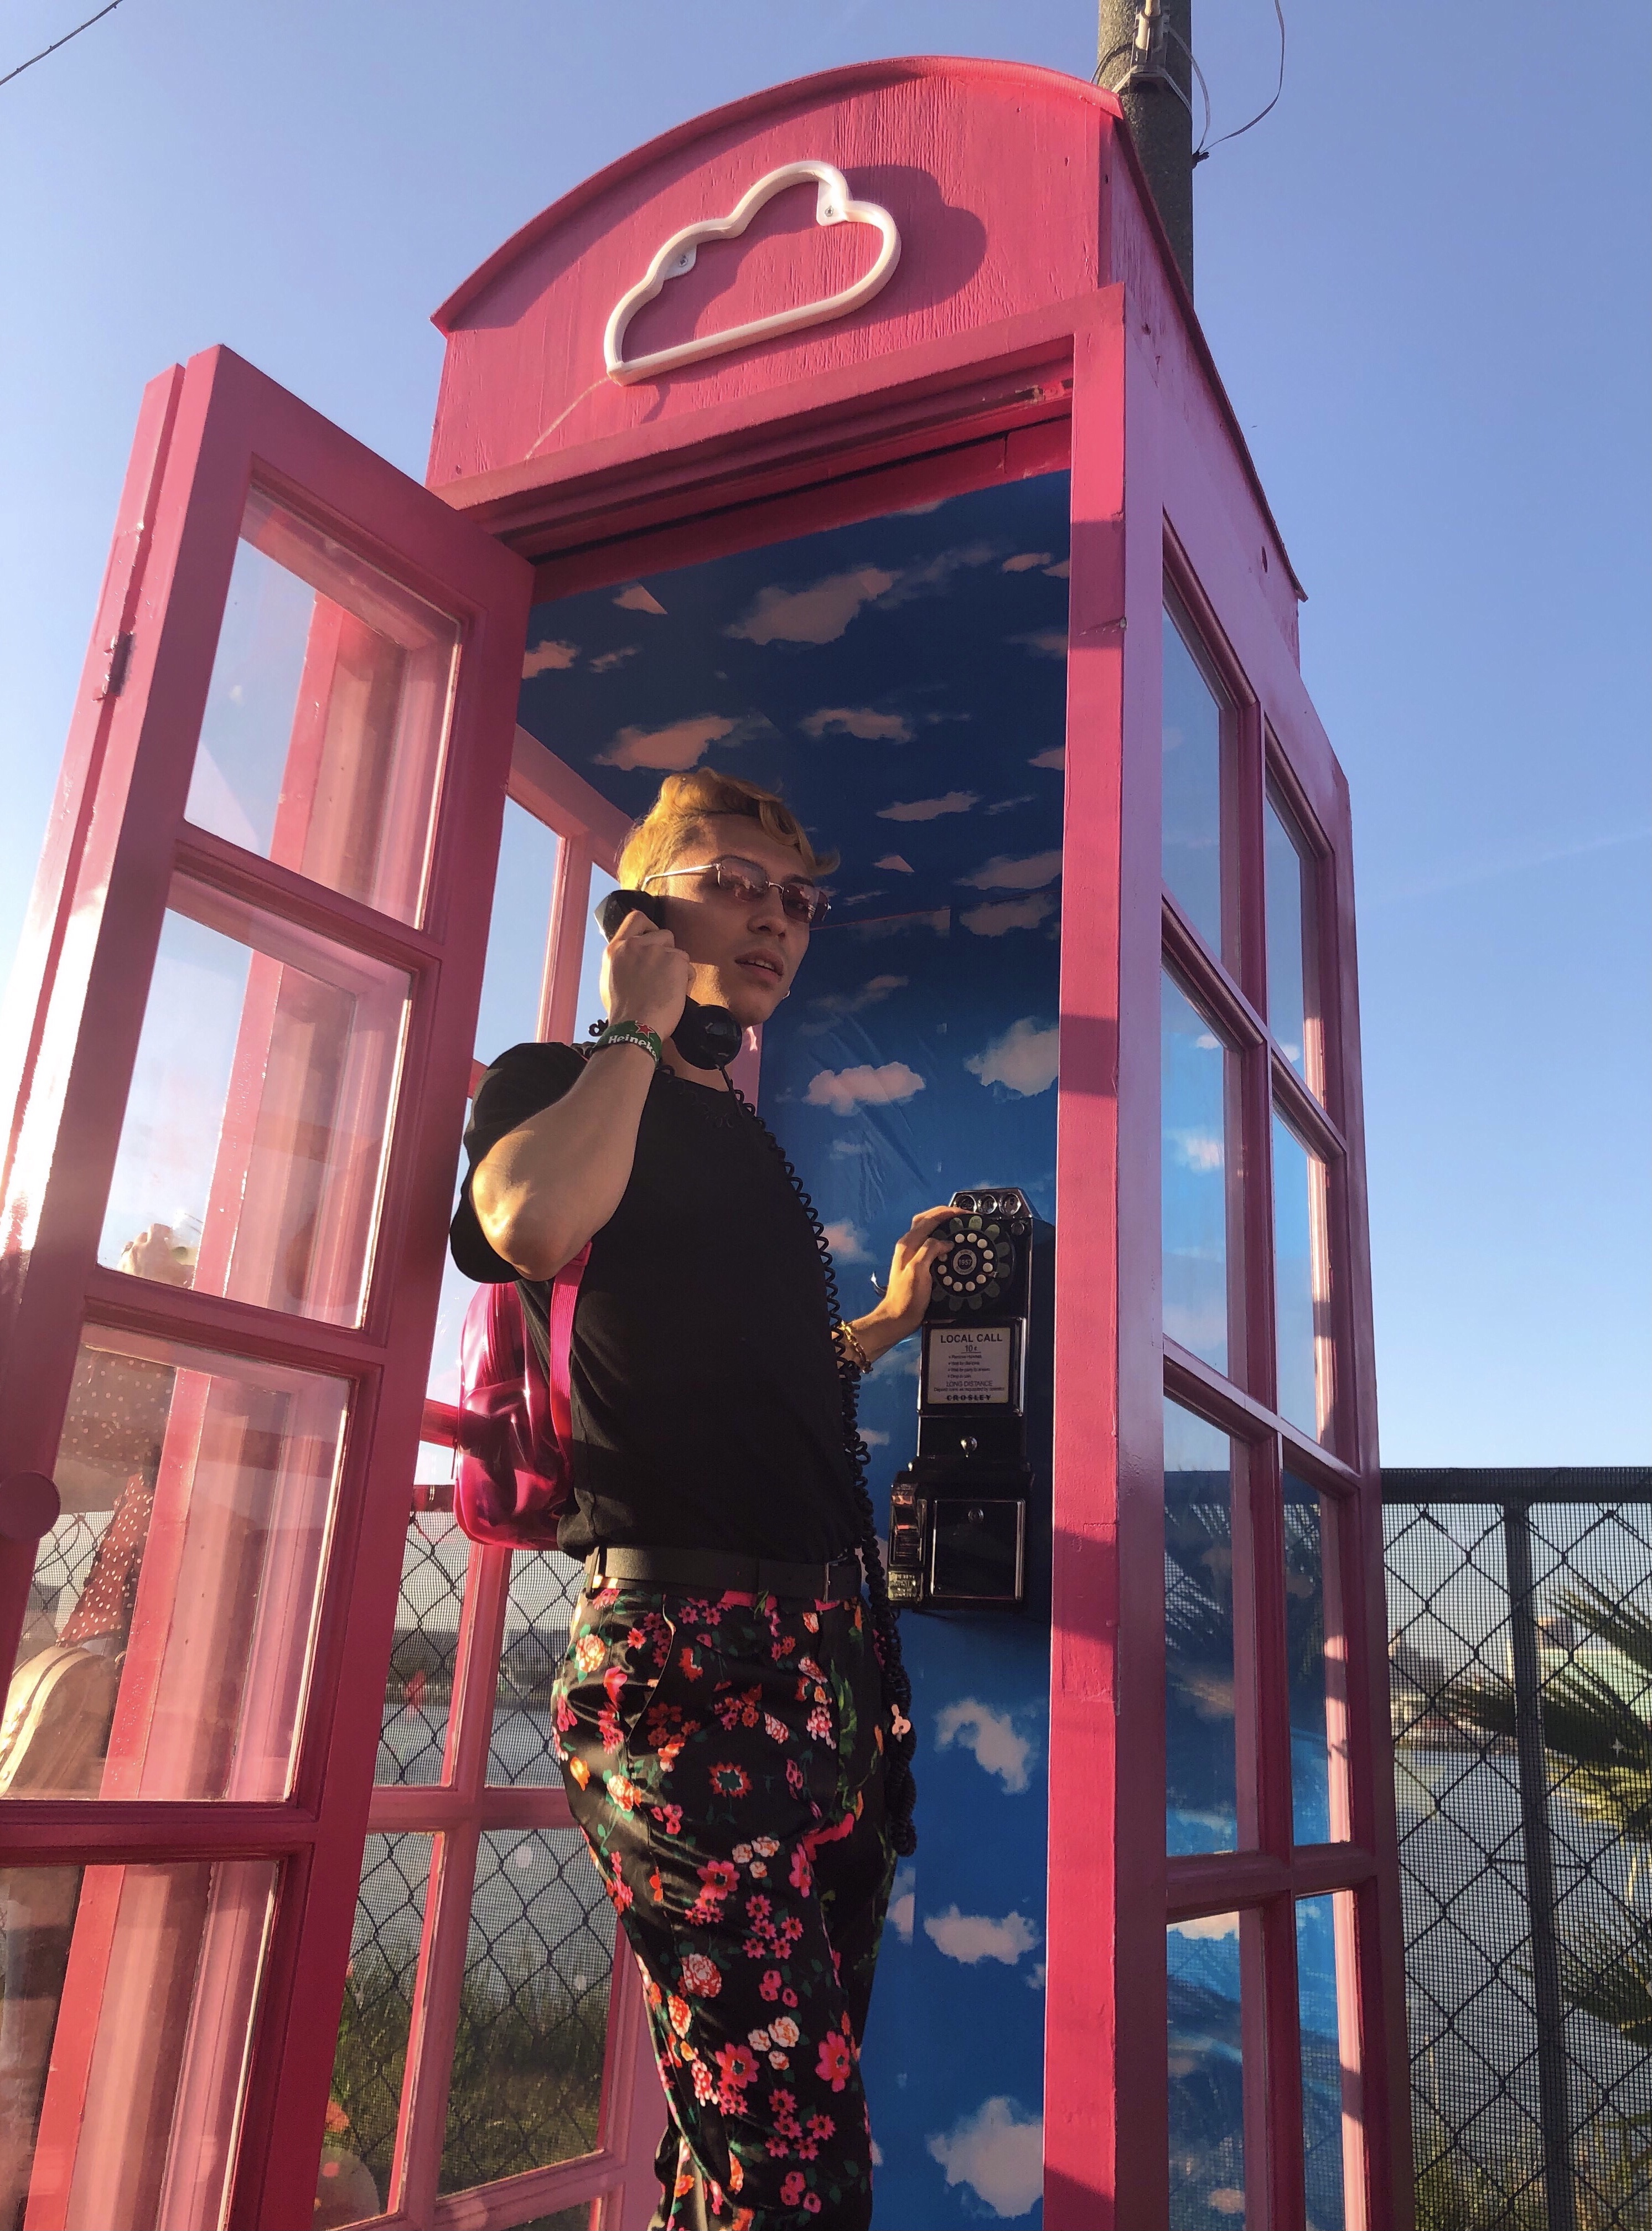 Stephen wearing flower print pants while standing in a phone booth